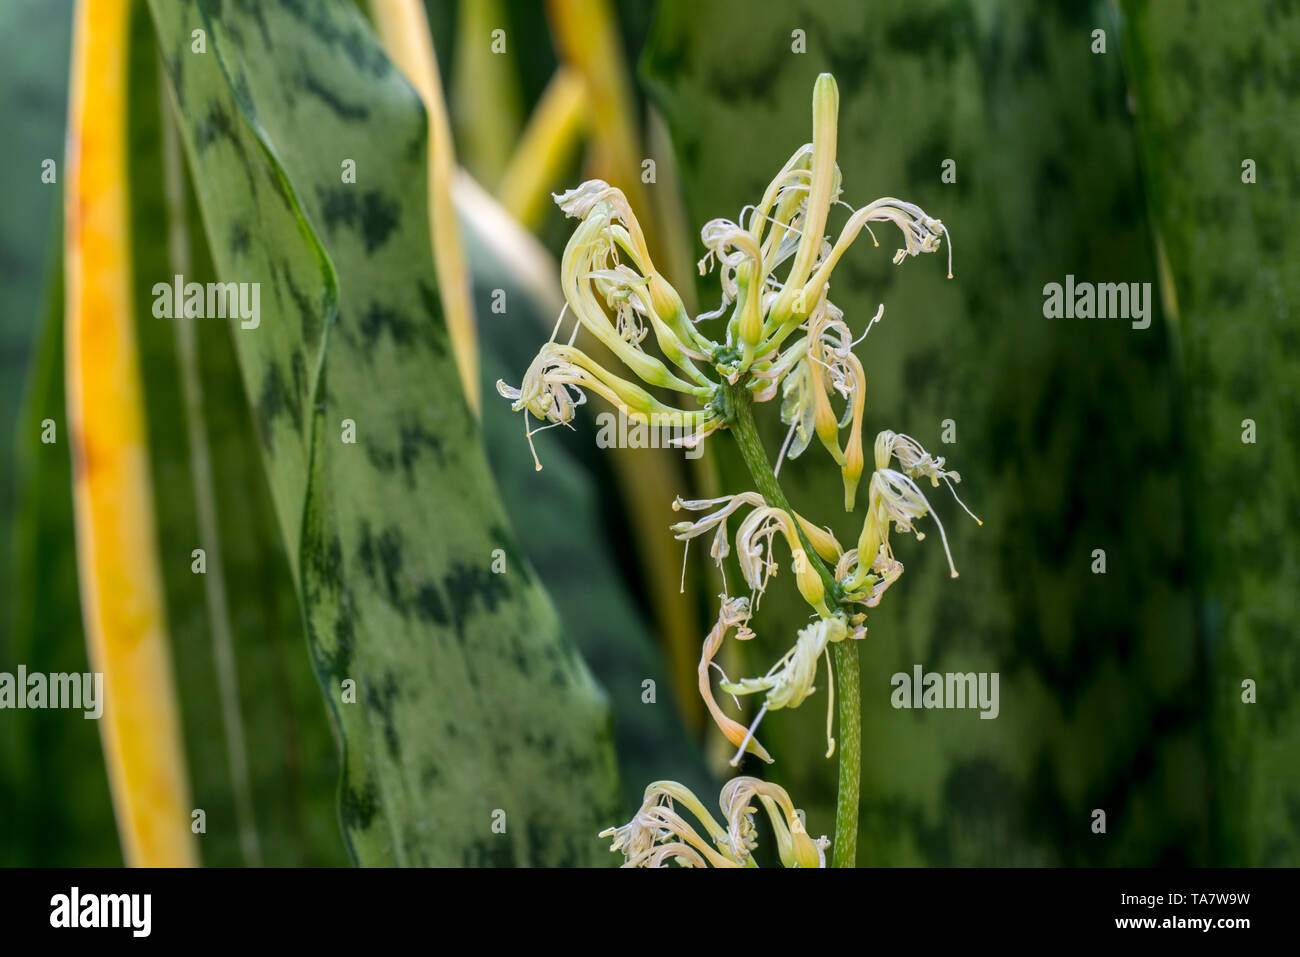 Striped Mother In Law S Tongue Snake Plant Viper S Bowstring Hemp Sansevieria Trifasciata Laurentii In Flower Native To Tropical West Africa Stock Photo Alamy,How To Play Gin Rummy Video